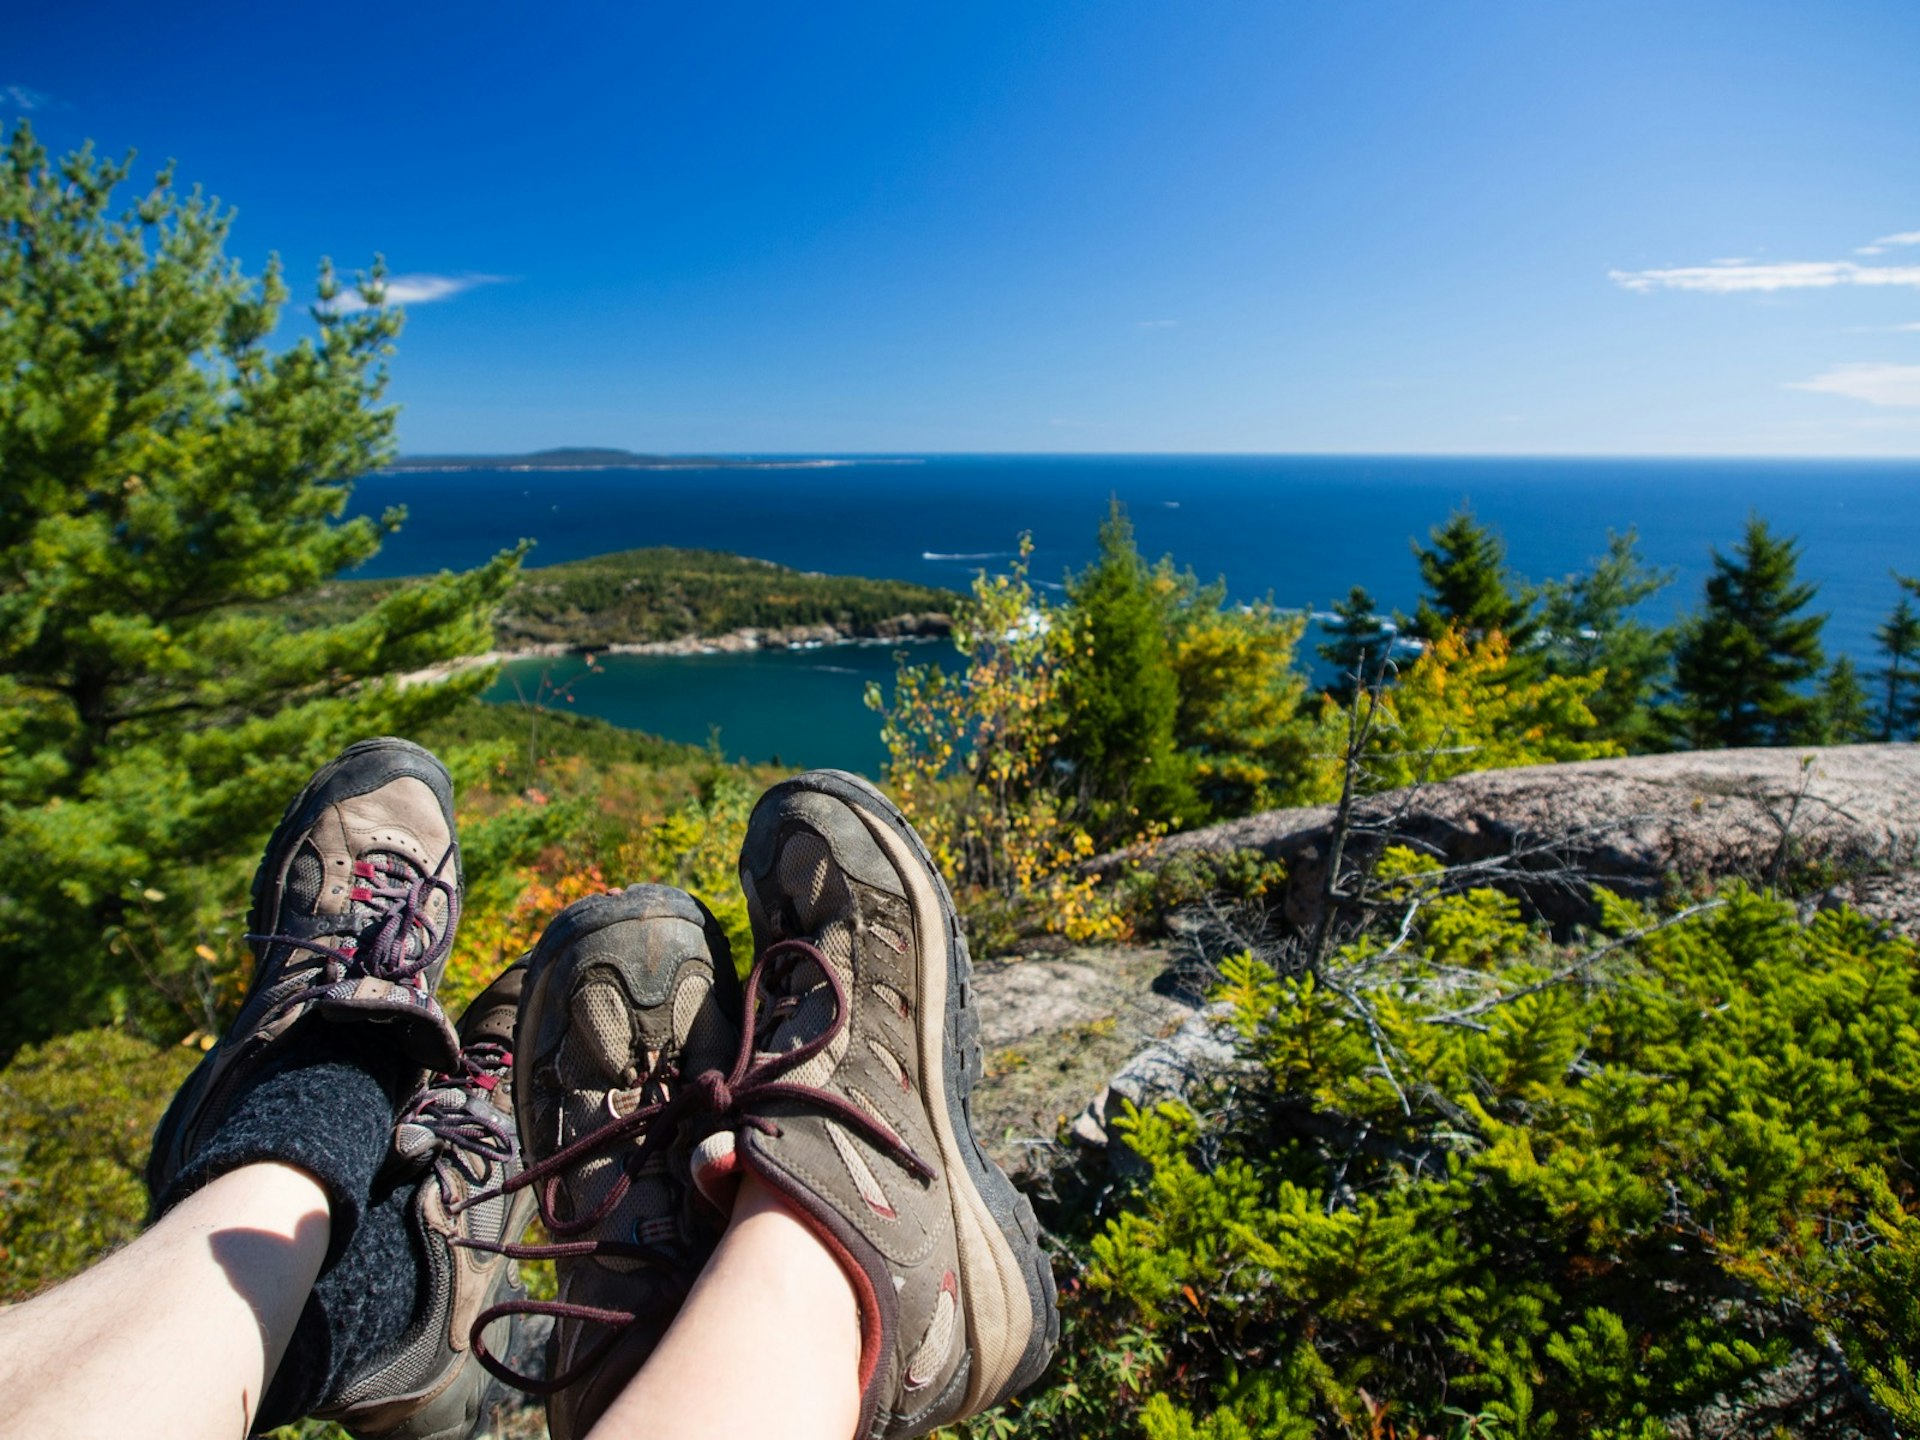 Hiking boots are stretched out over a coastline view as people are resting at the top of a mountain in Acadia National Park